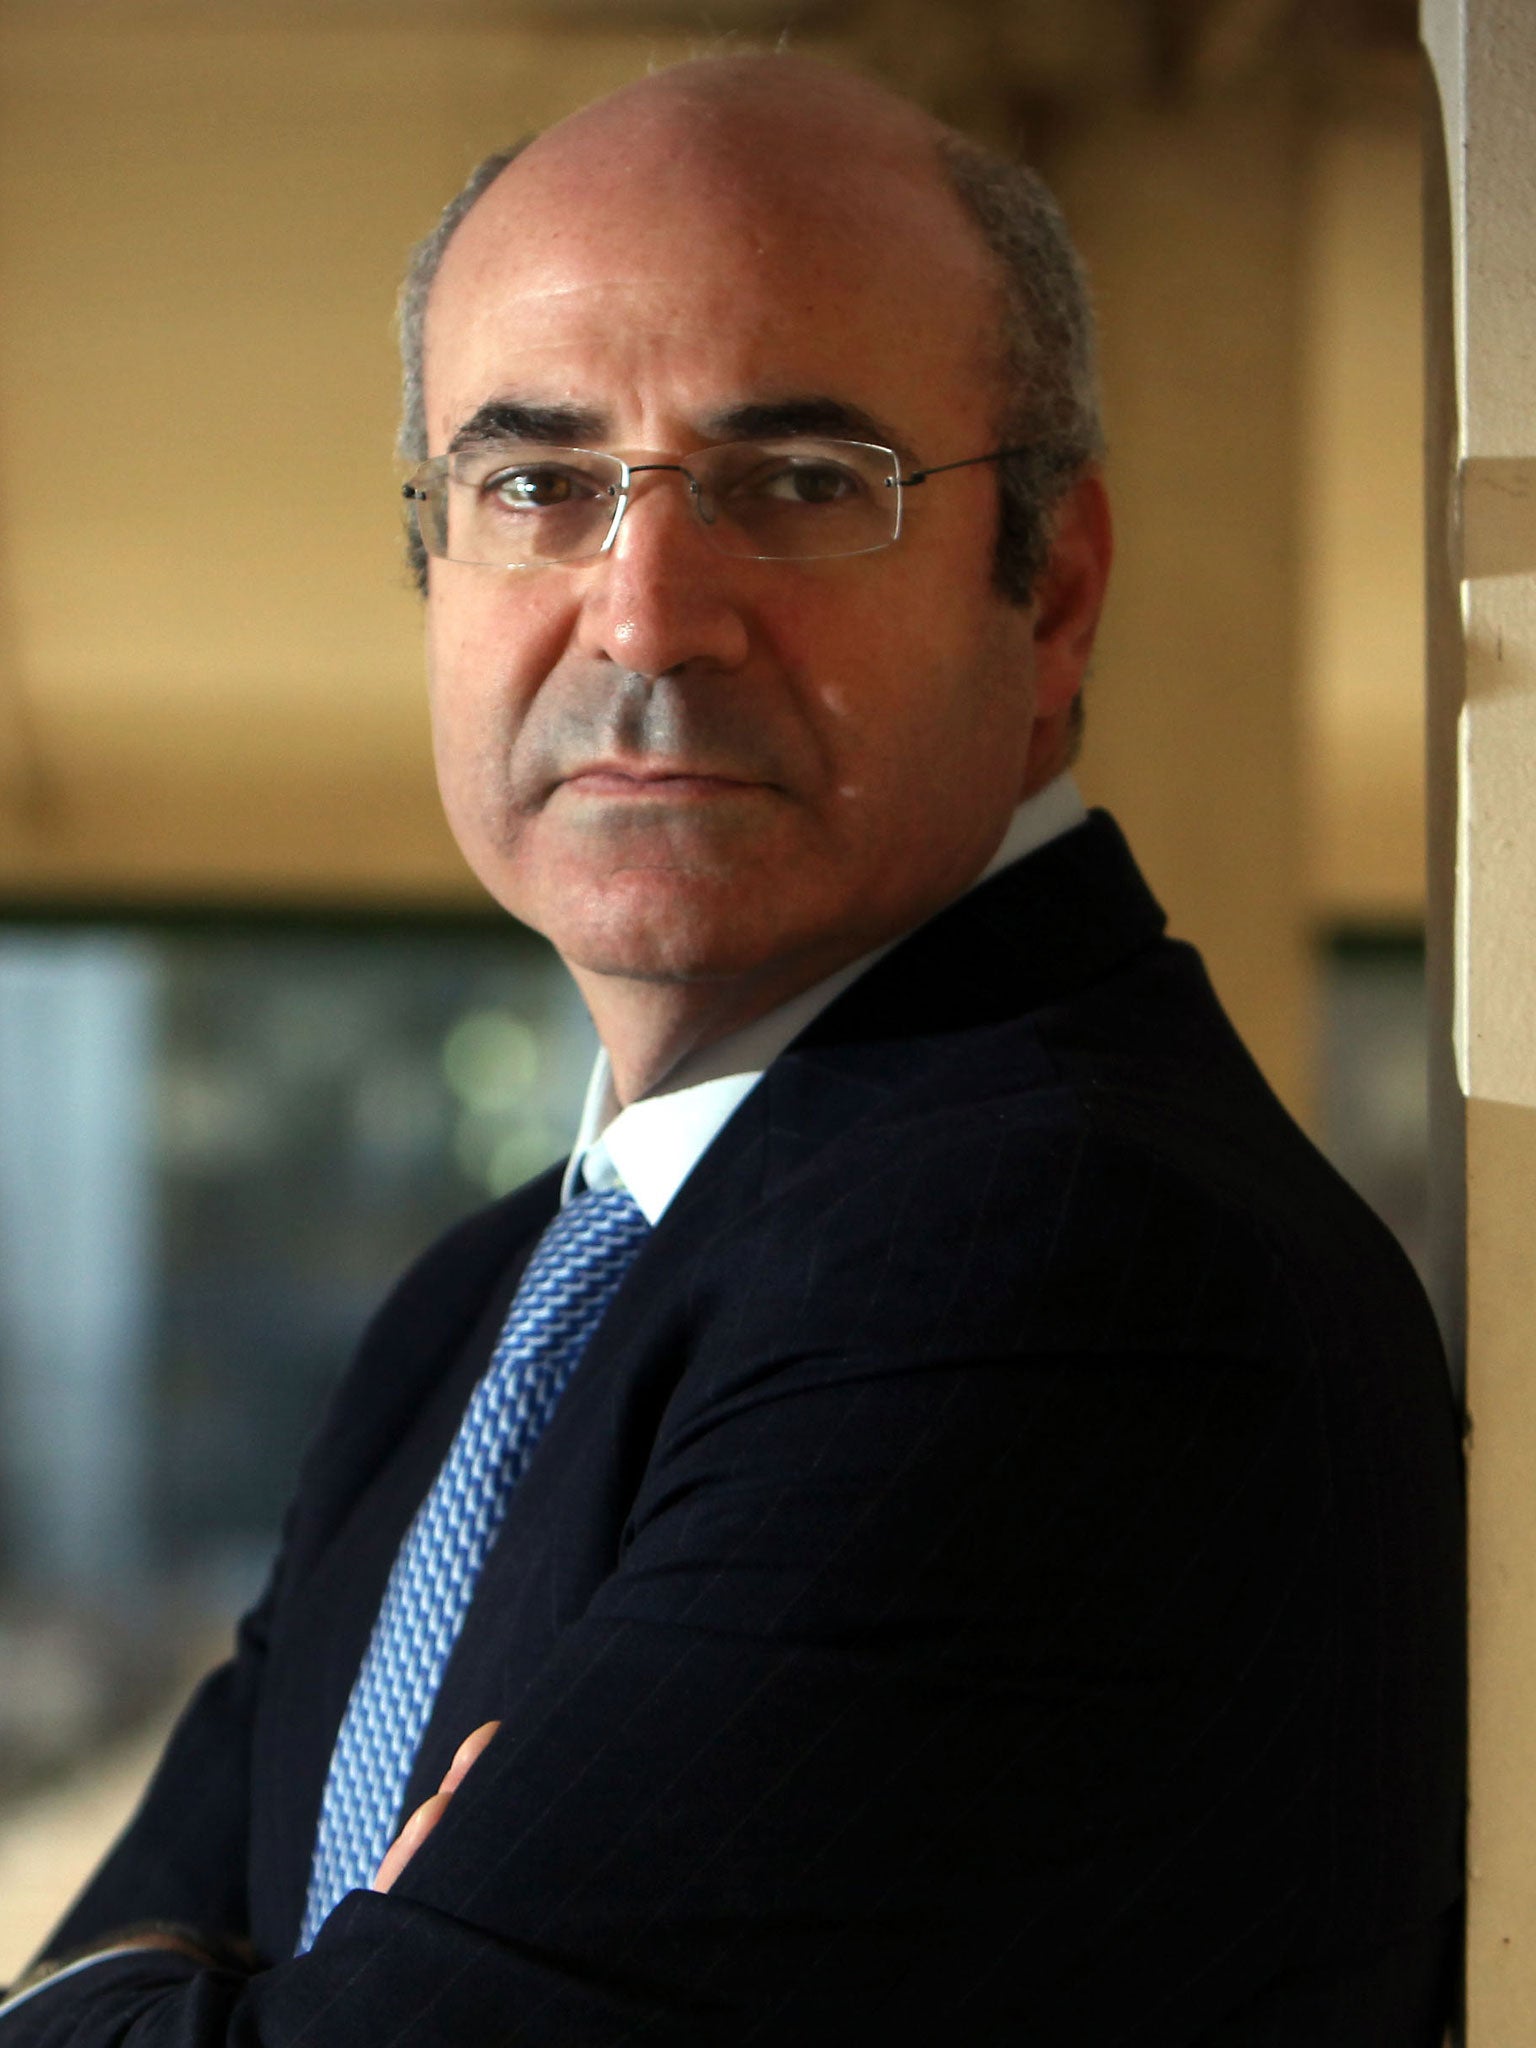 Bill Browder: The financier is seeking justice in the death of a whistle-blower